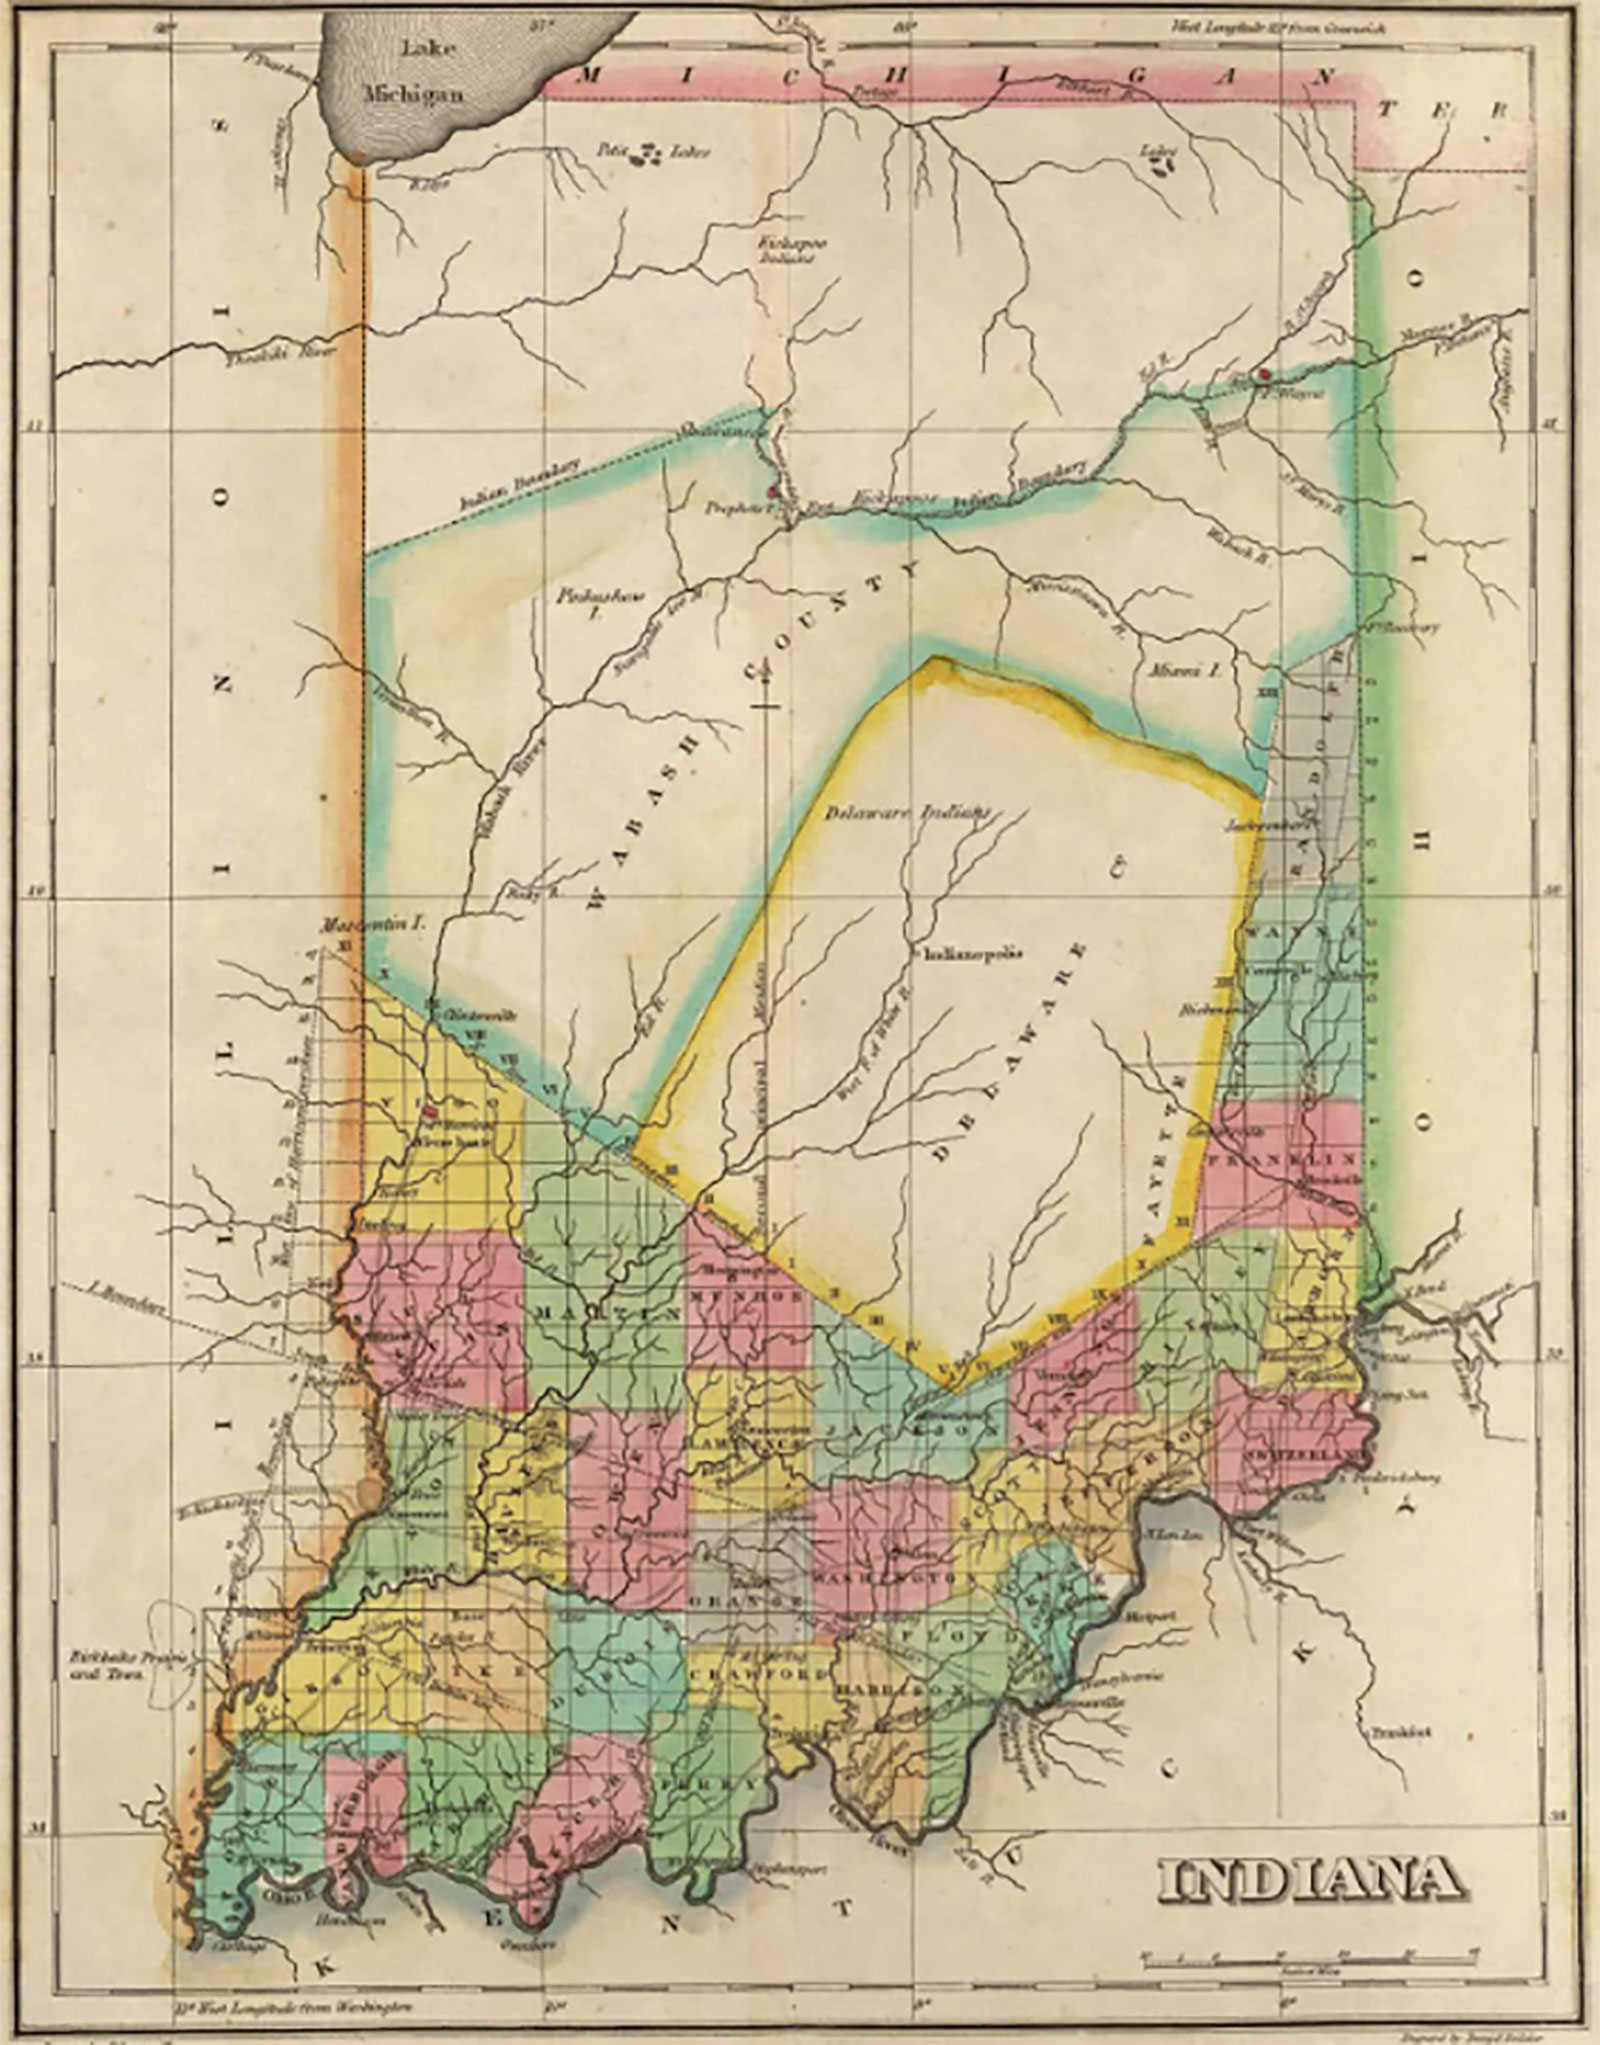 1822 colonization map of Indiana.